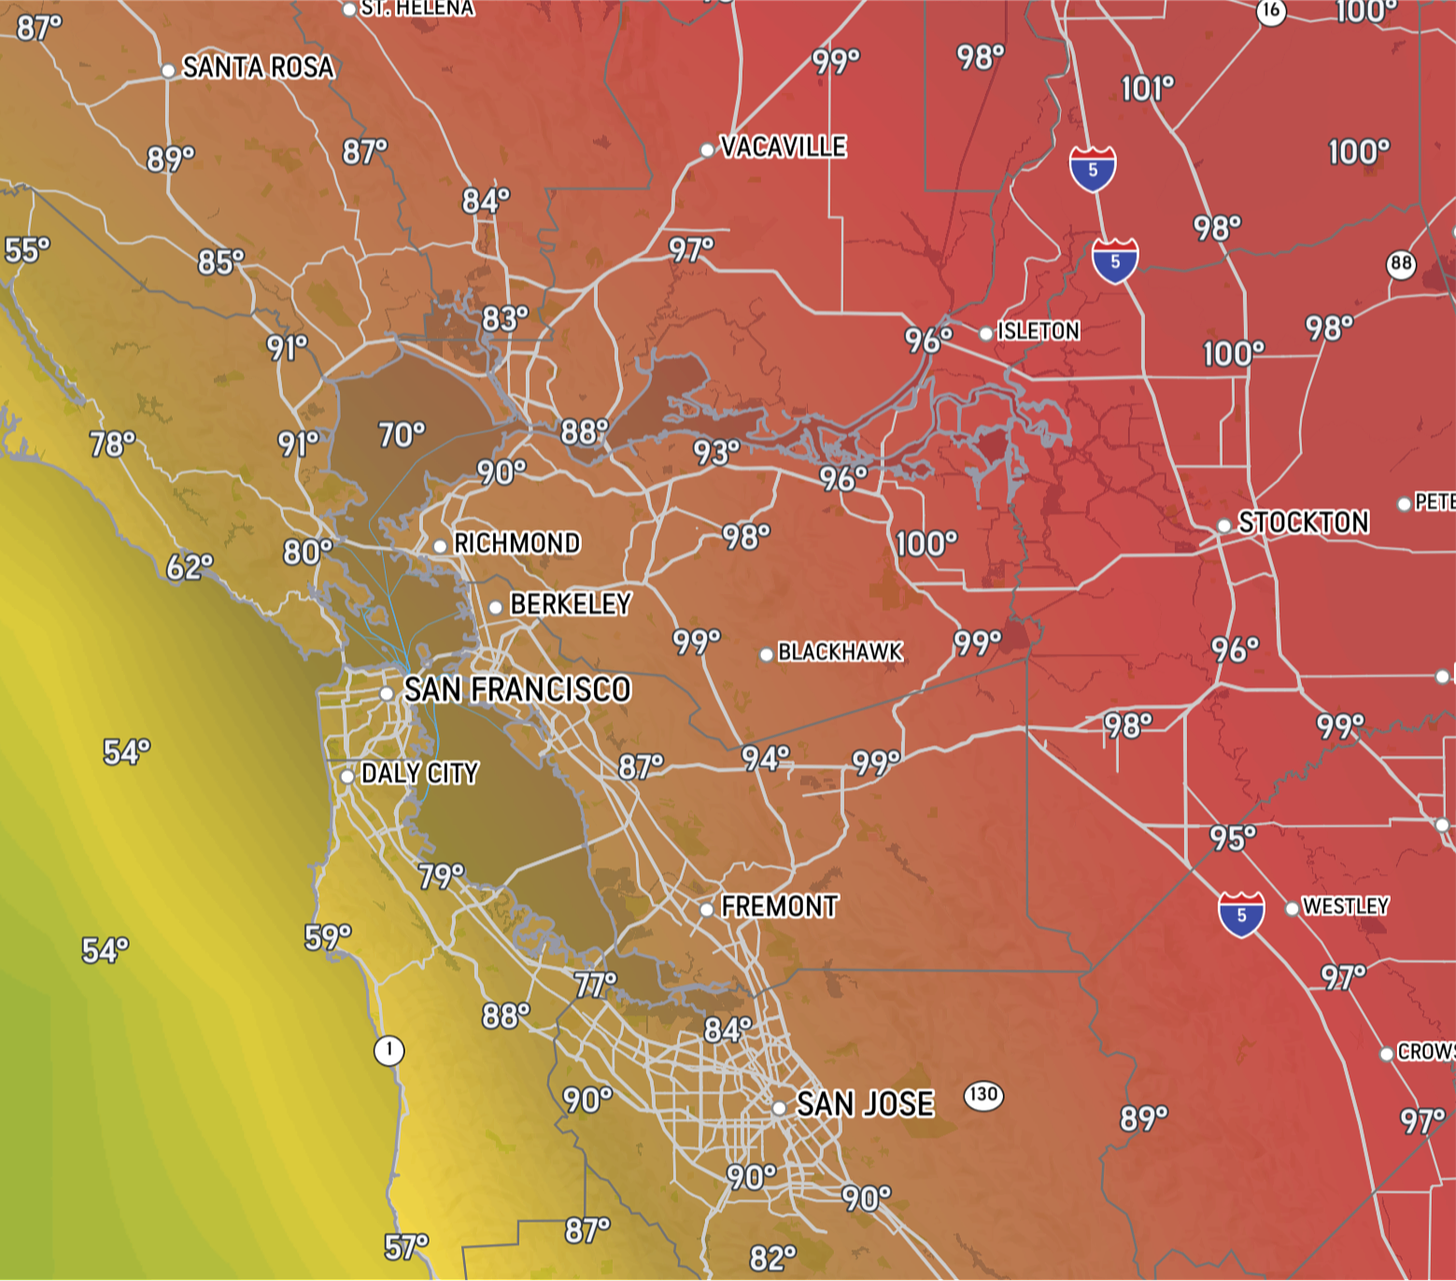 Picture of a weather map of the San Francisco Bay area